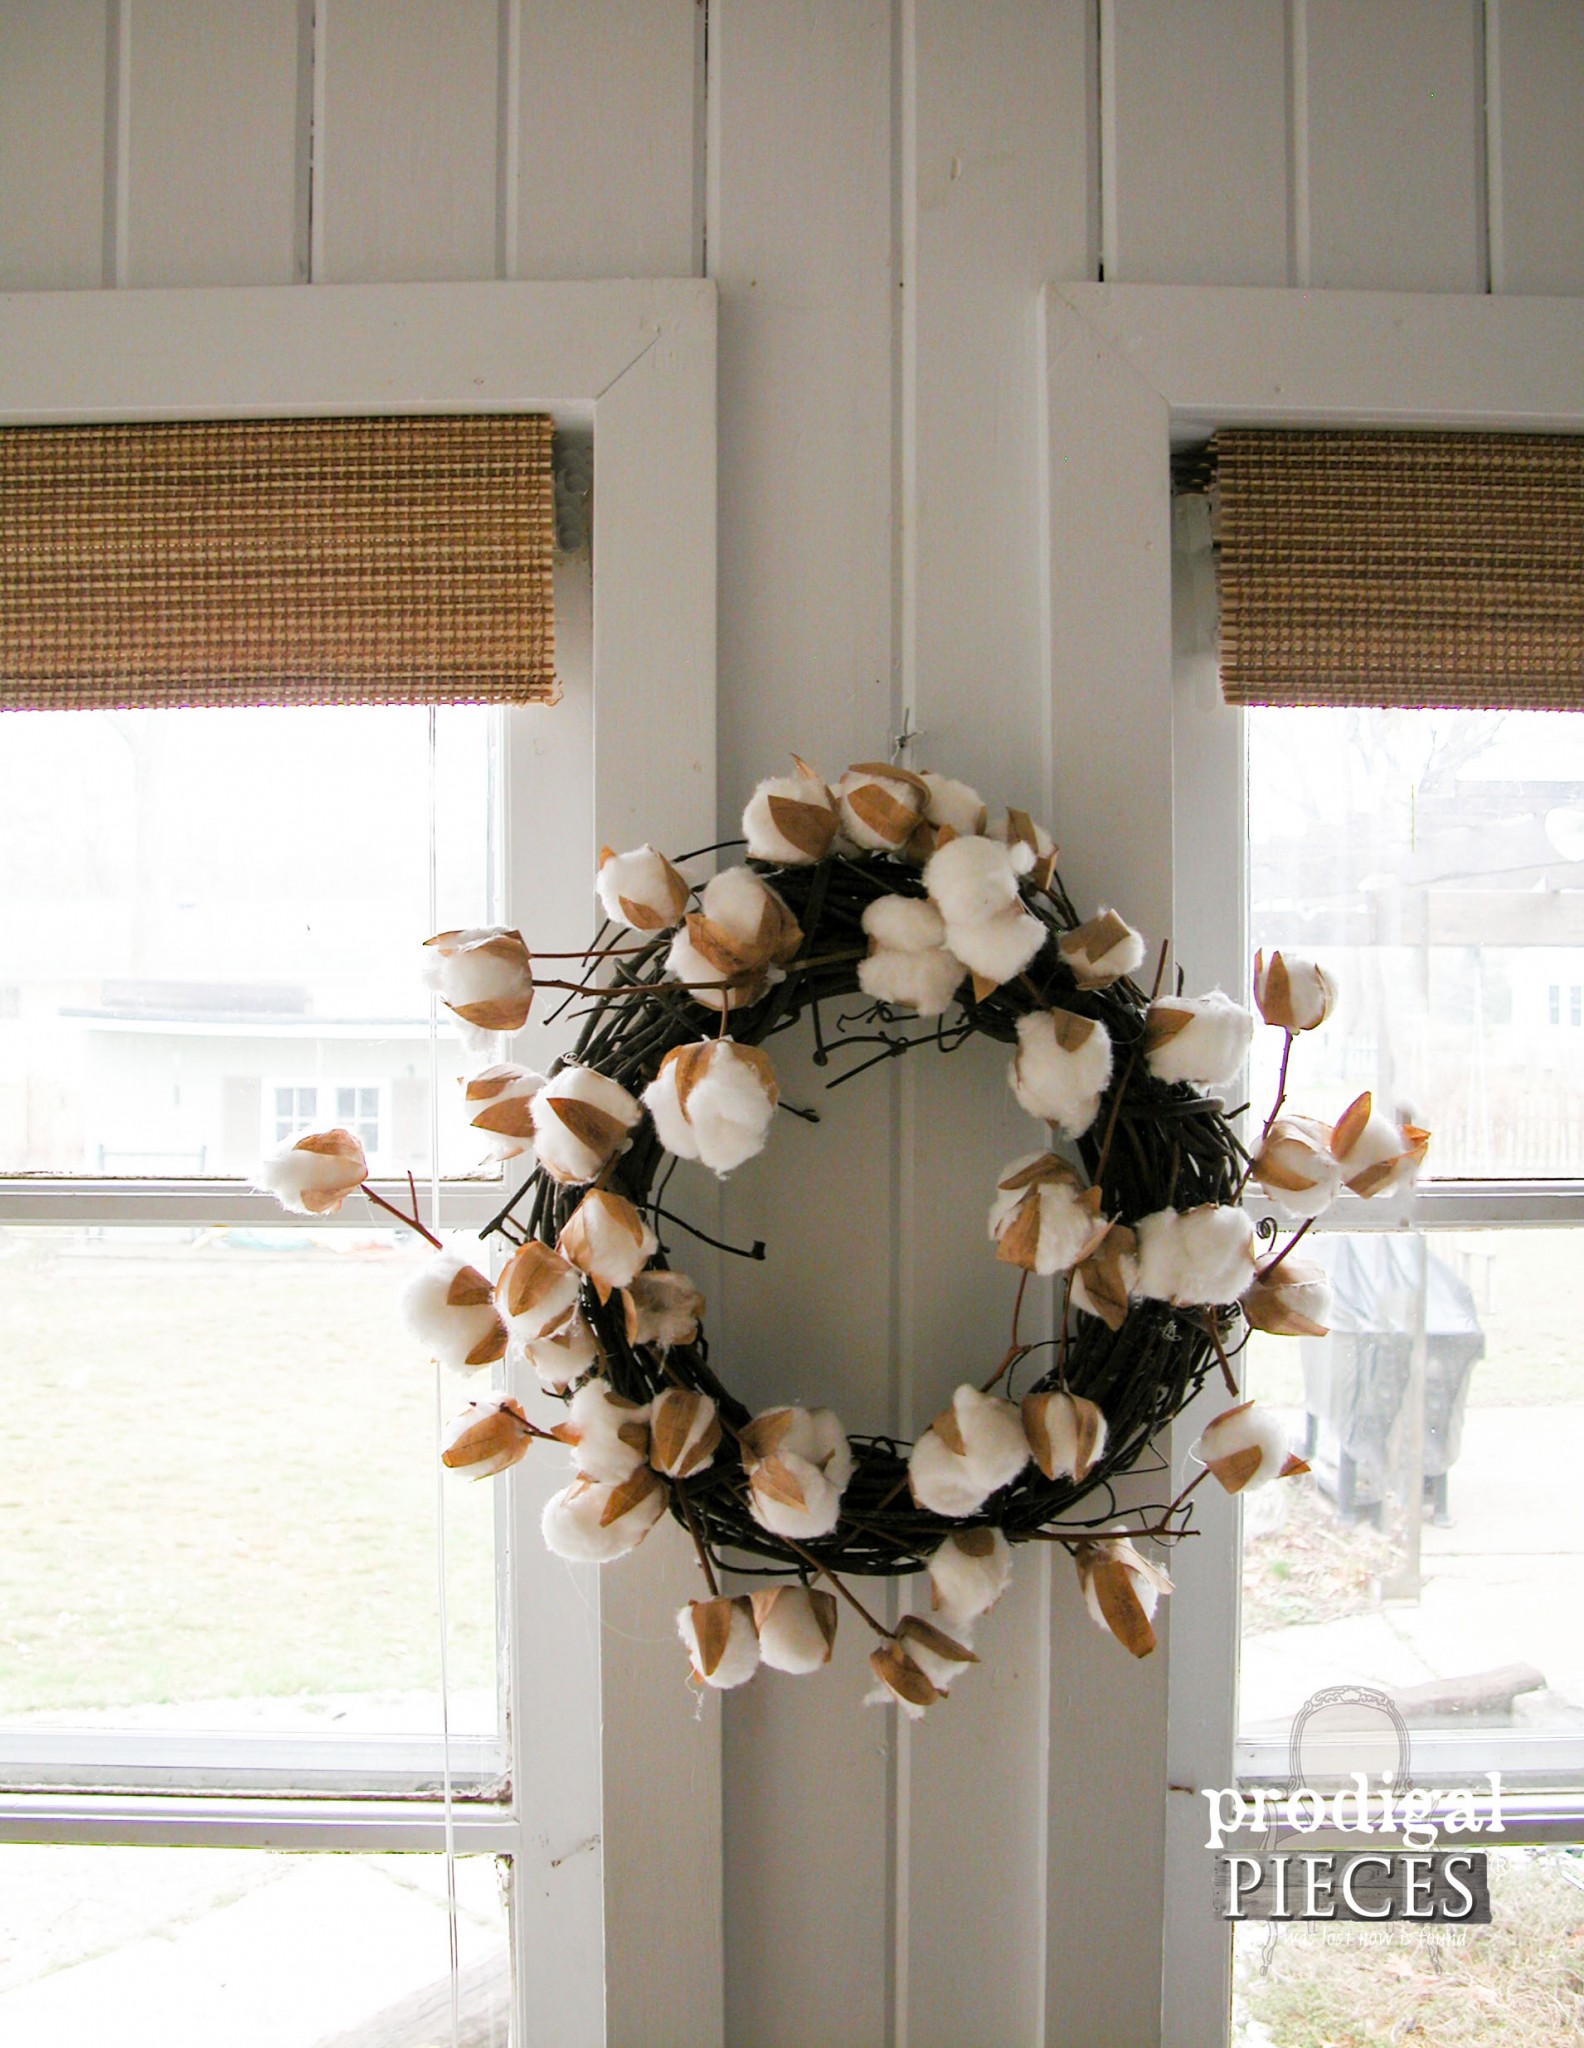  DIY Budget Window Treatment with Faux Bamboo Shades | Prodigal Pieces | www.prodigalpieces.com